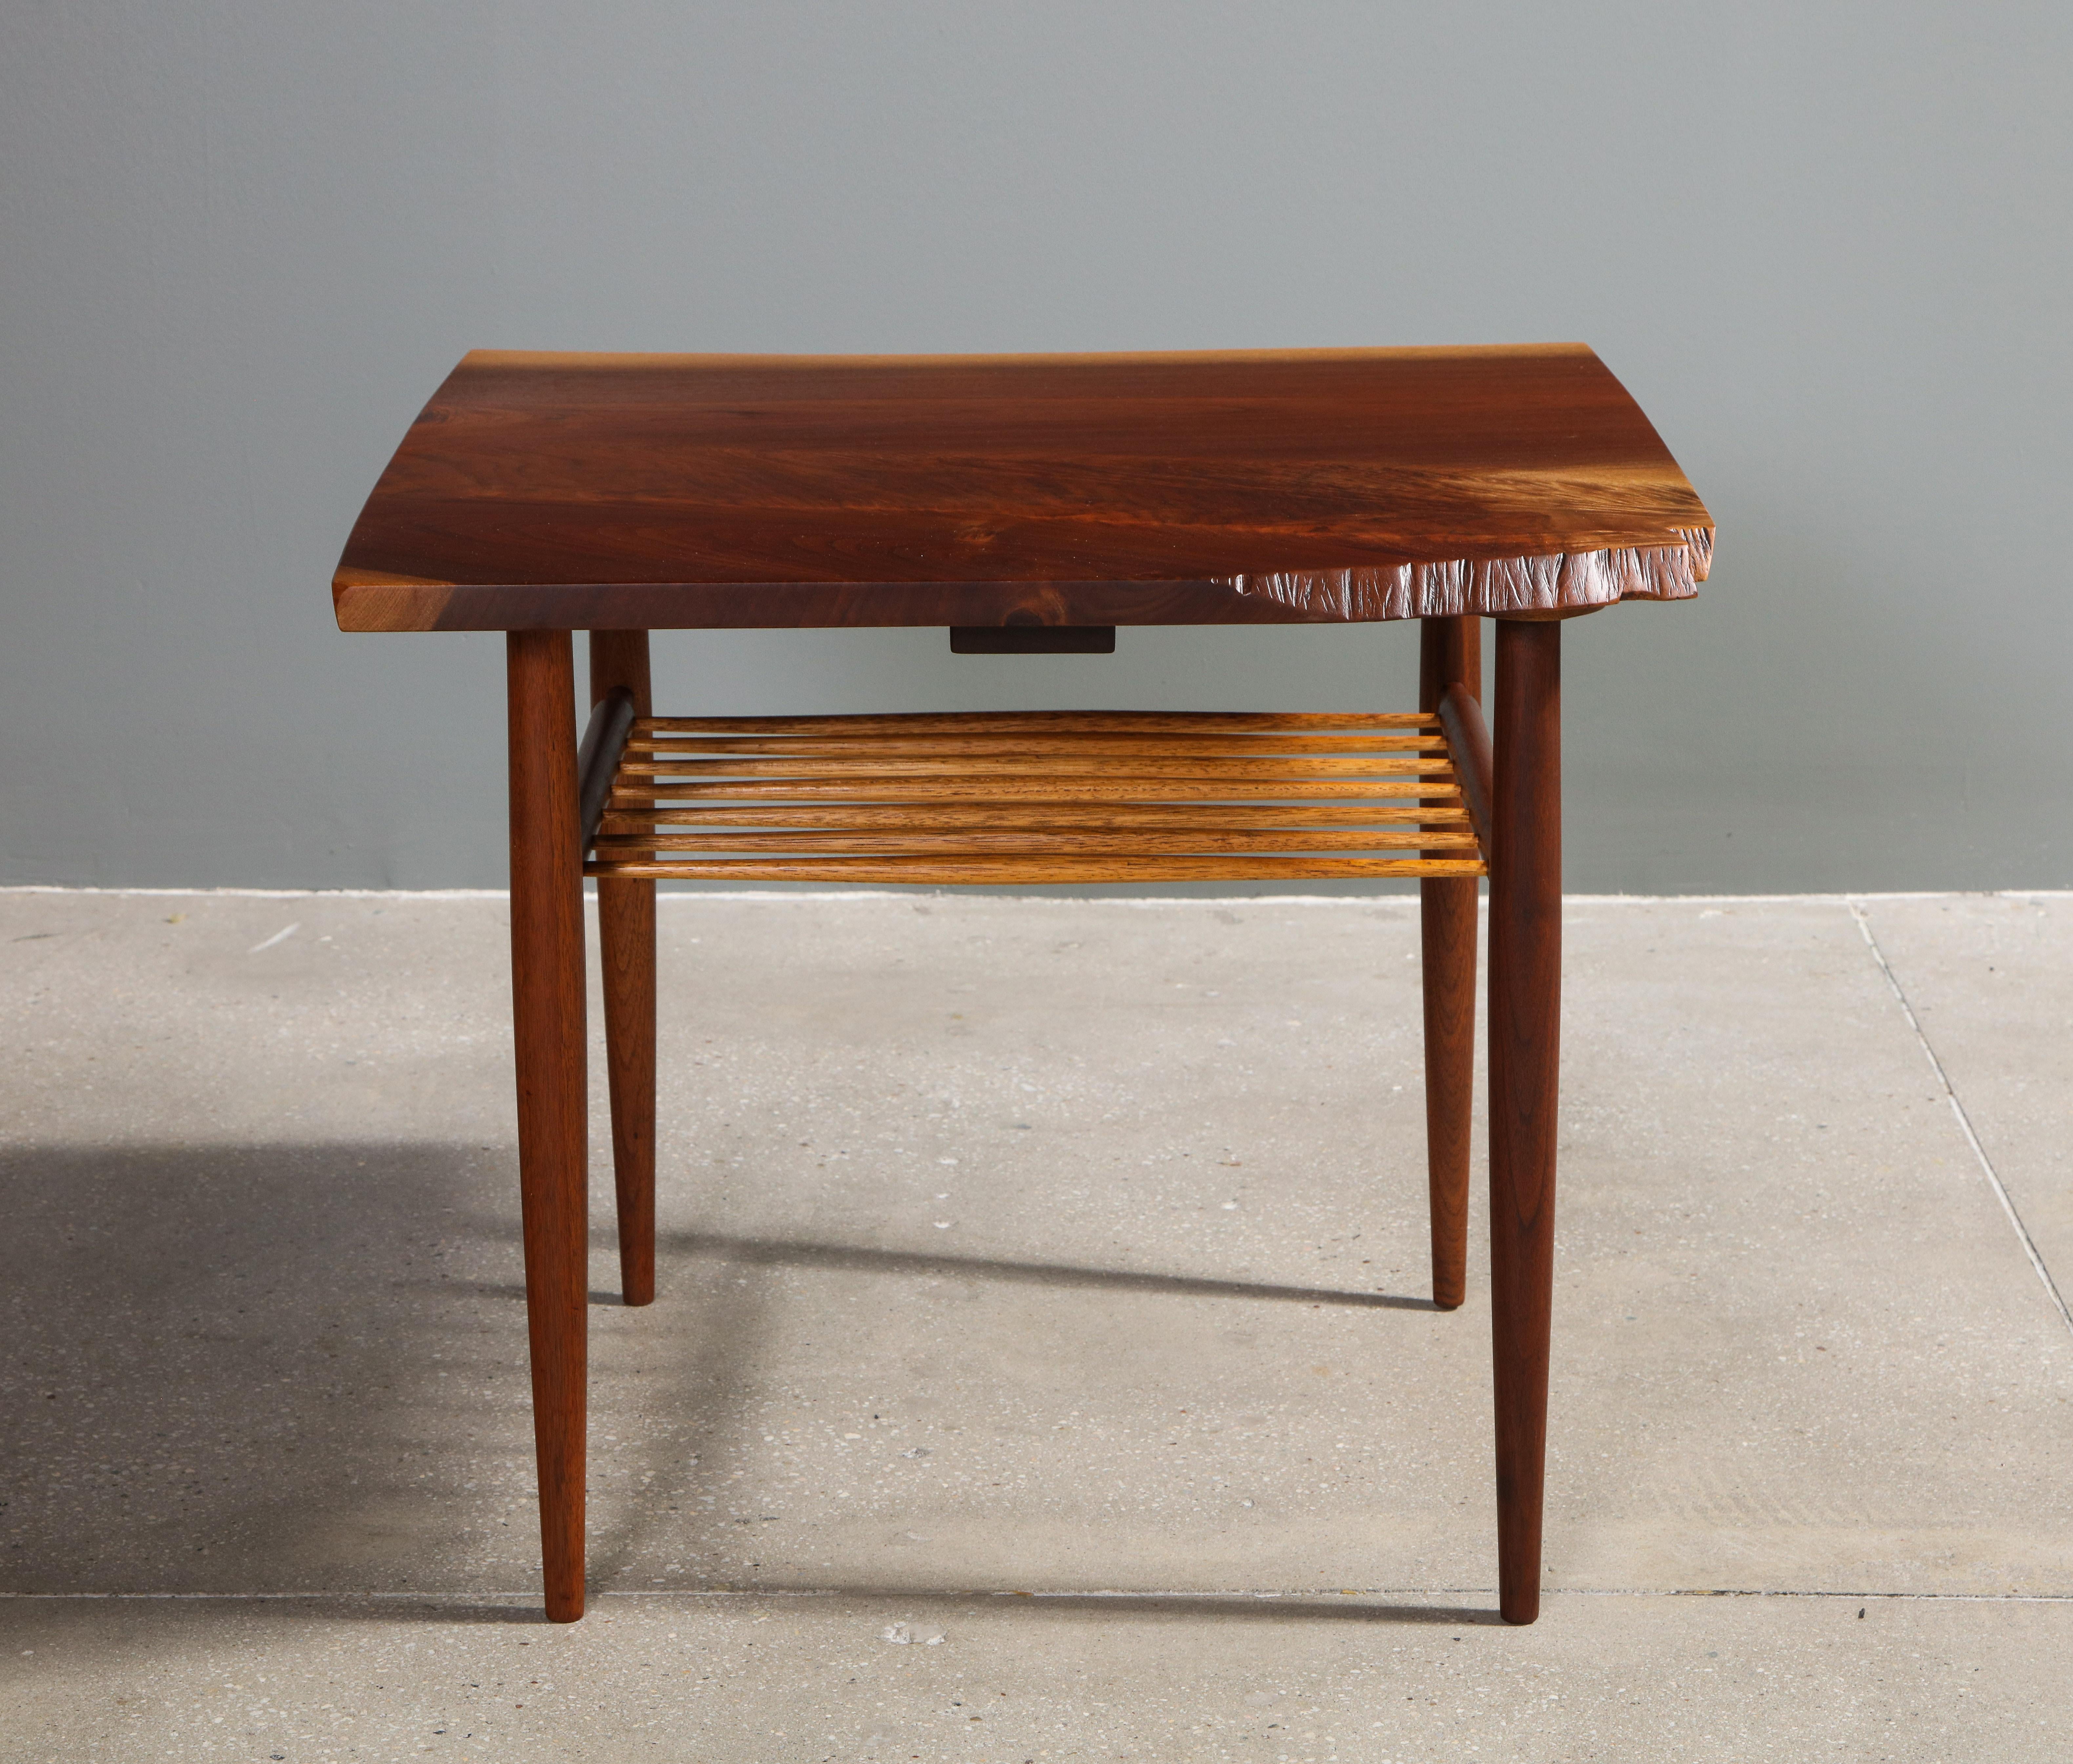 An early side table made from a free-edged walnut plank with four spindle legs and eight spindles as a shelf in 1960, by George Nakashima. 

Recently restored by Nakashima Studios.

Provenance includes all original purchase receipts and letter